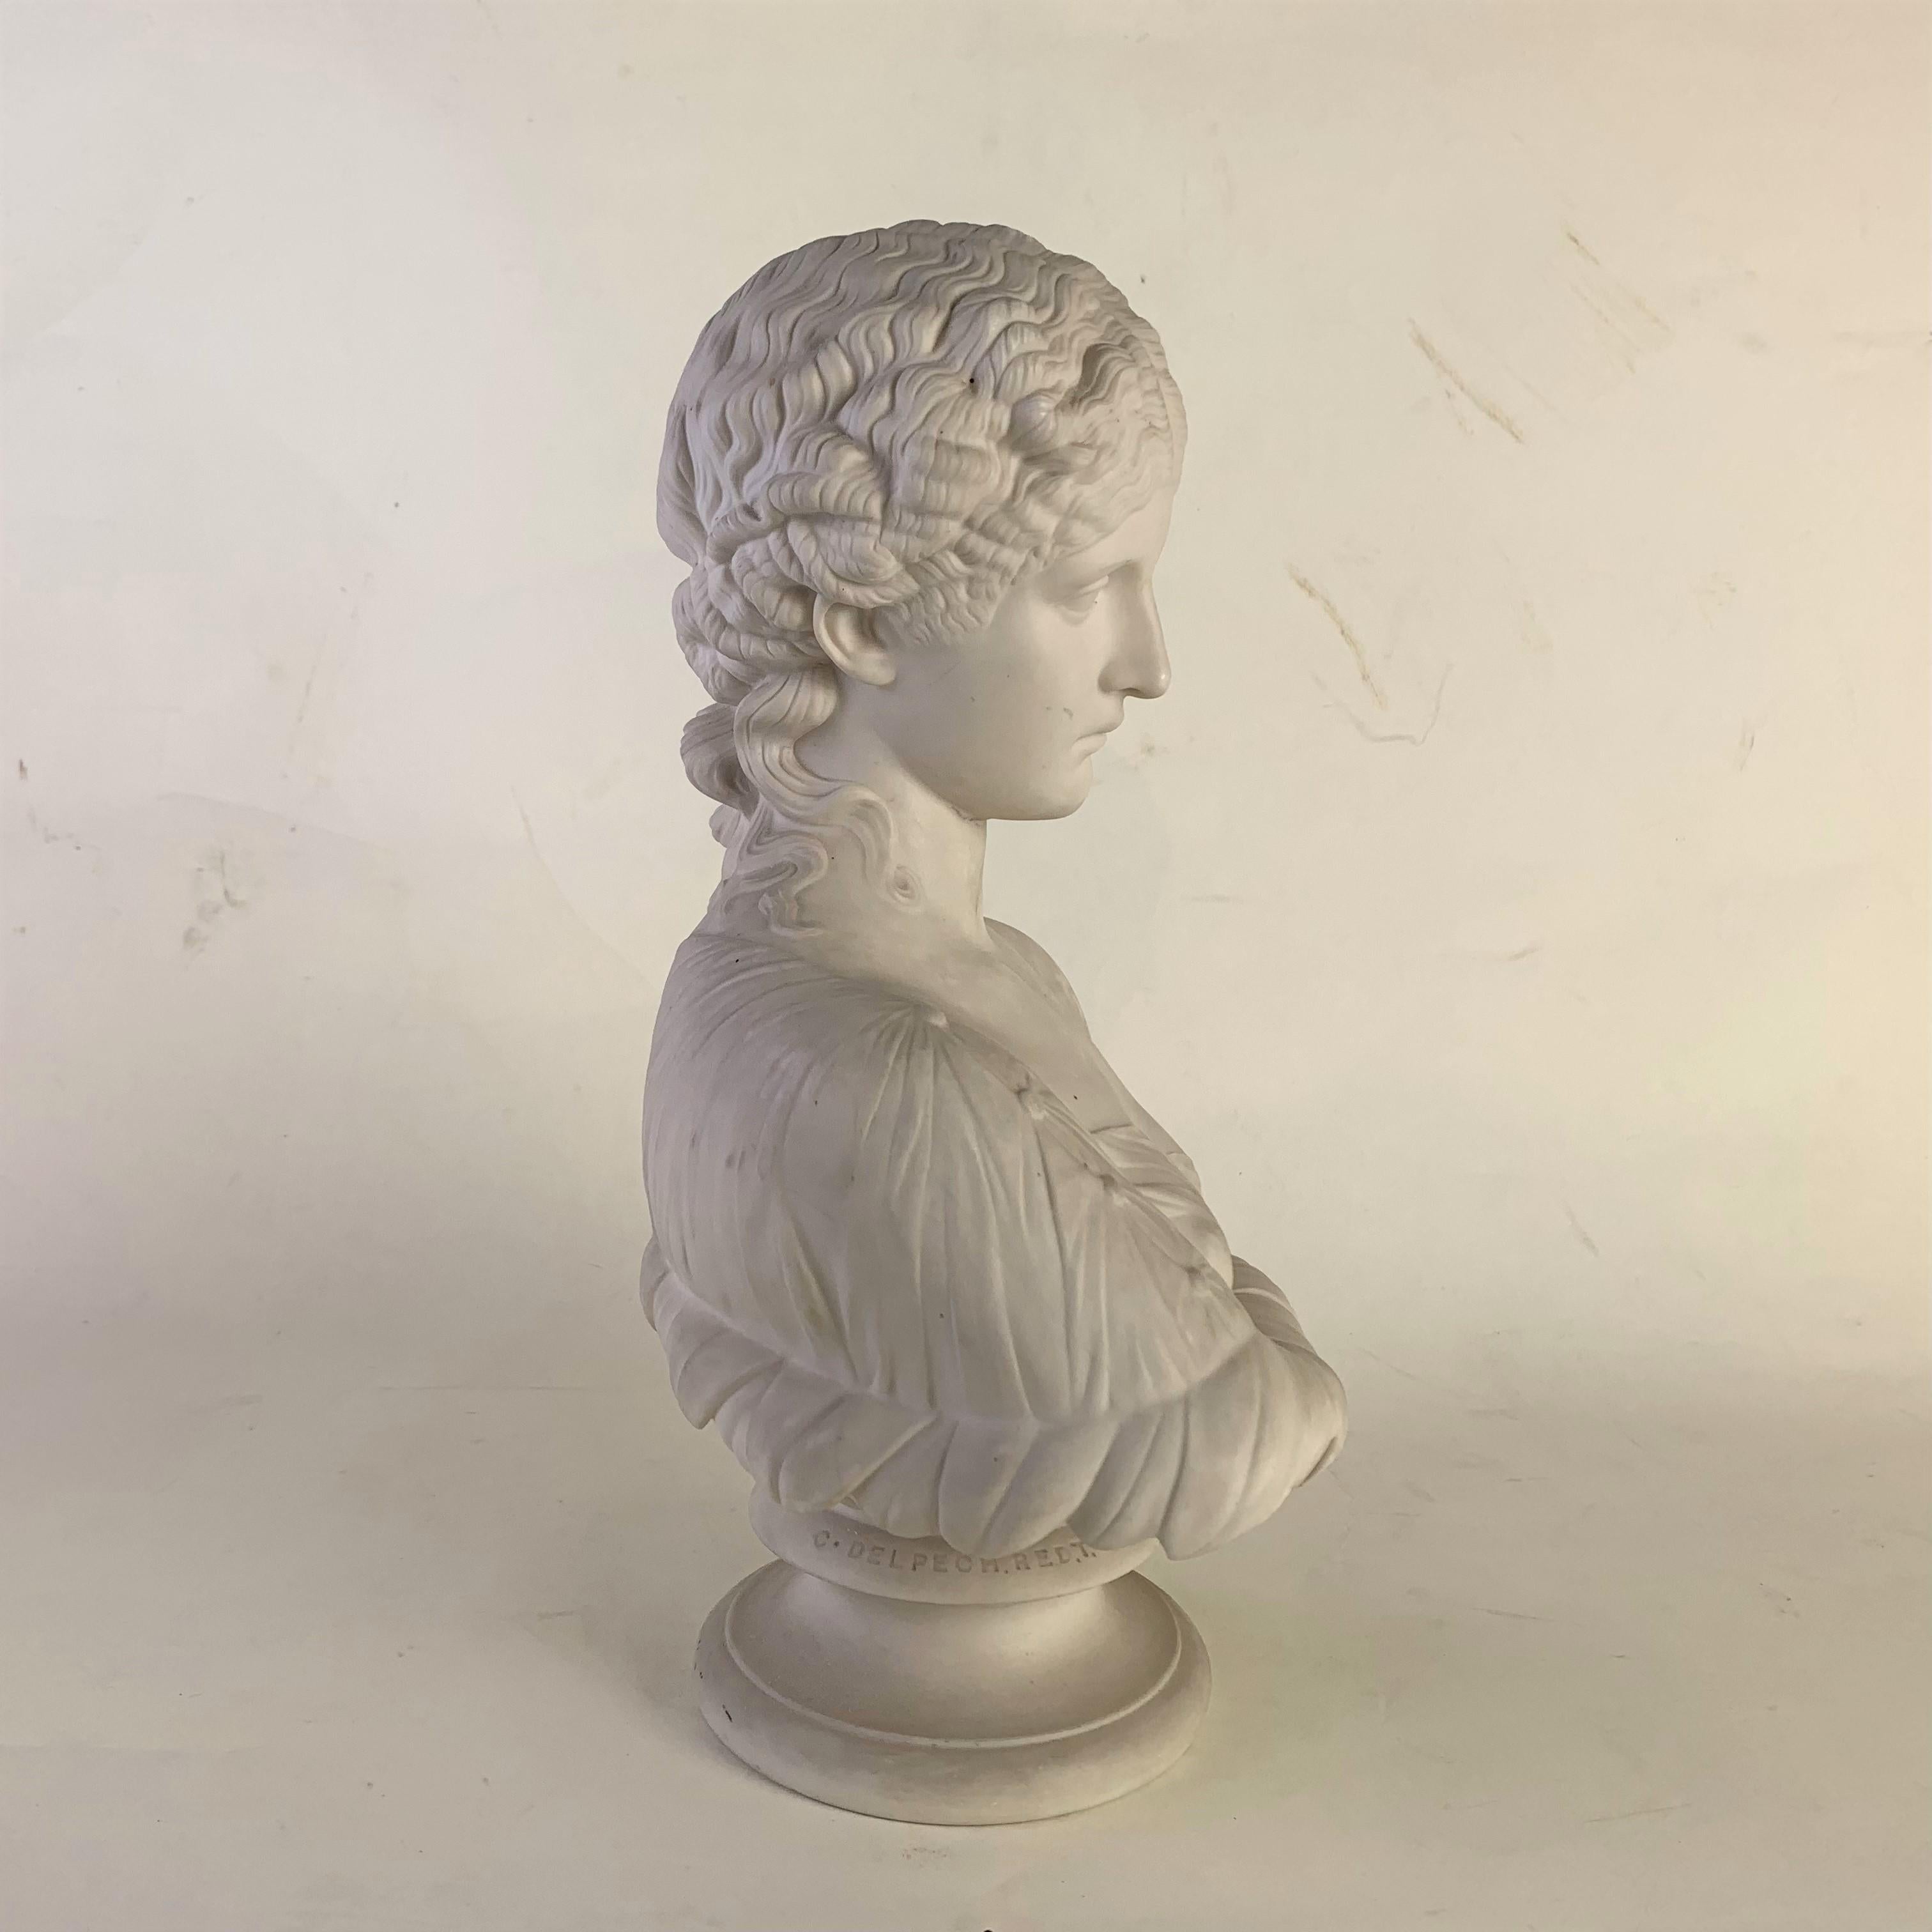 European Parian Ware Bust Titled 'Clytie' Sculpted by C. Delpech